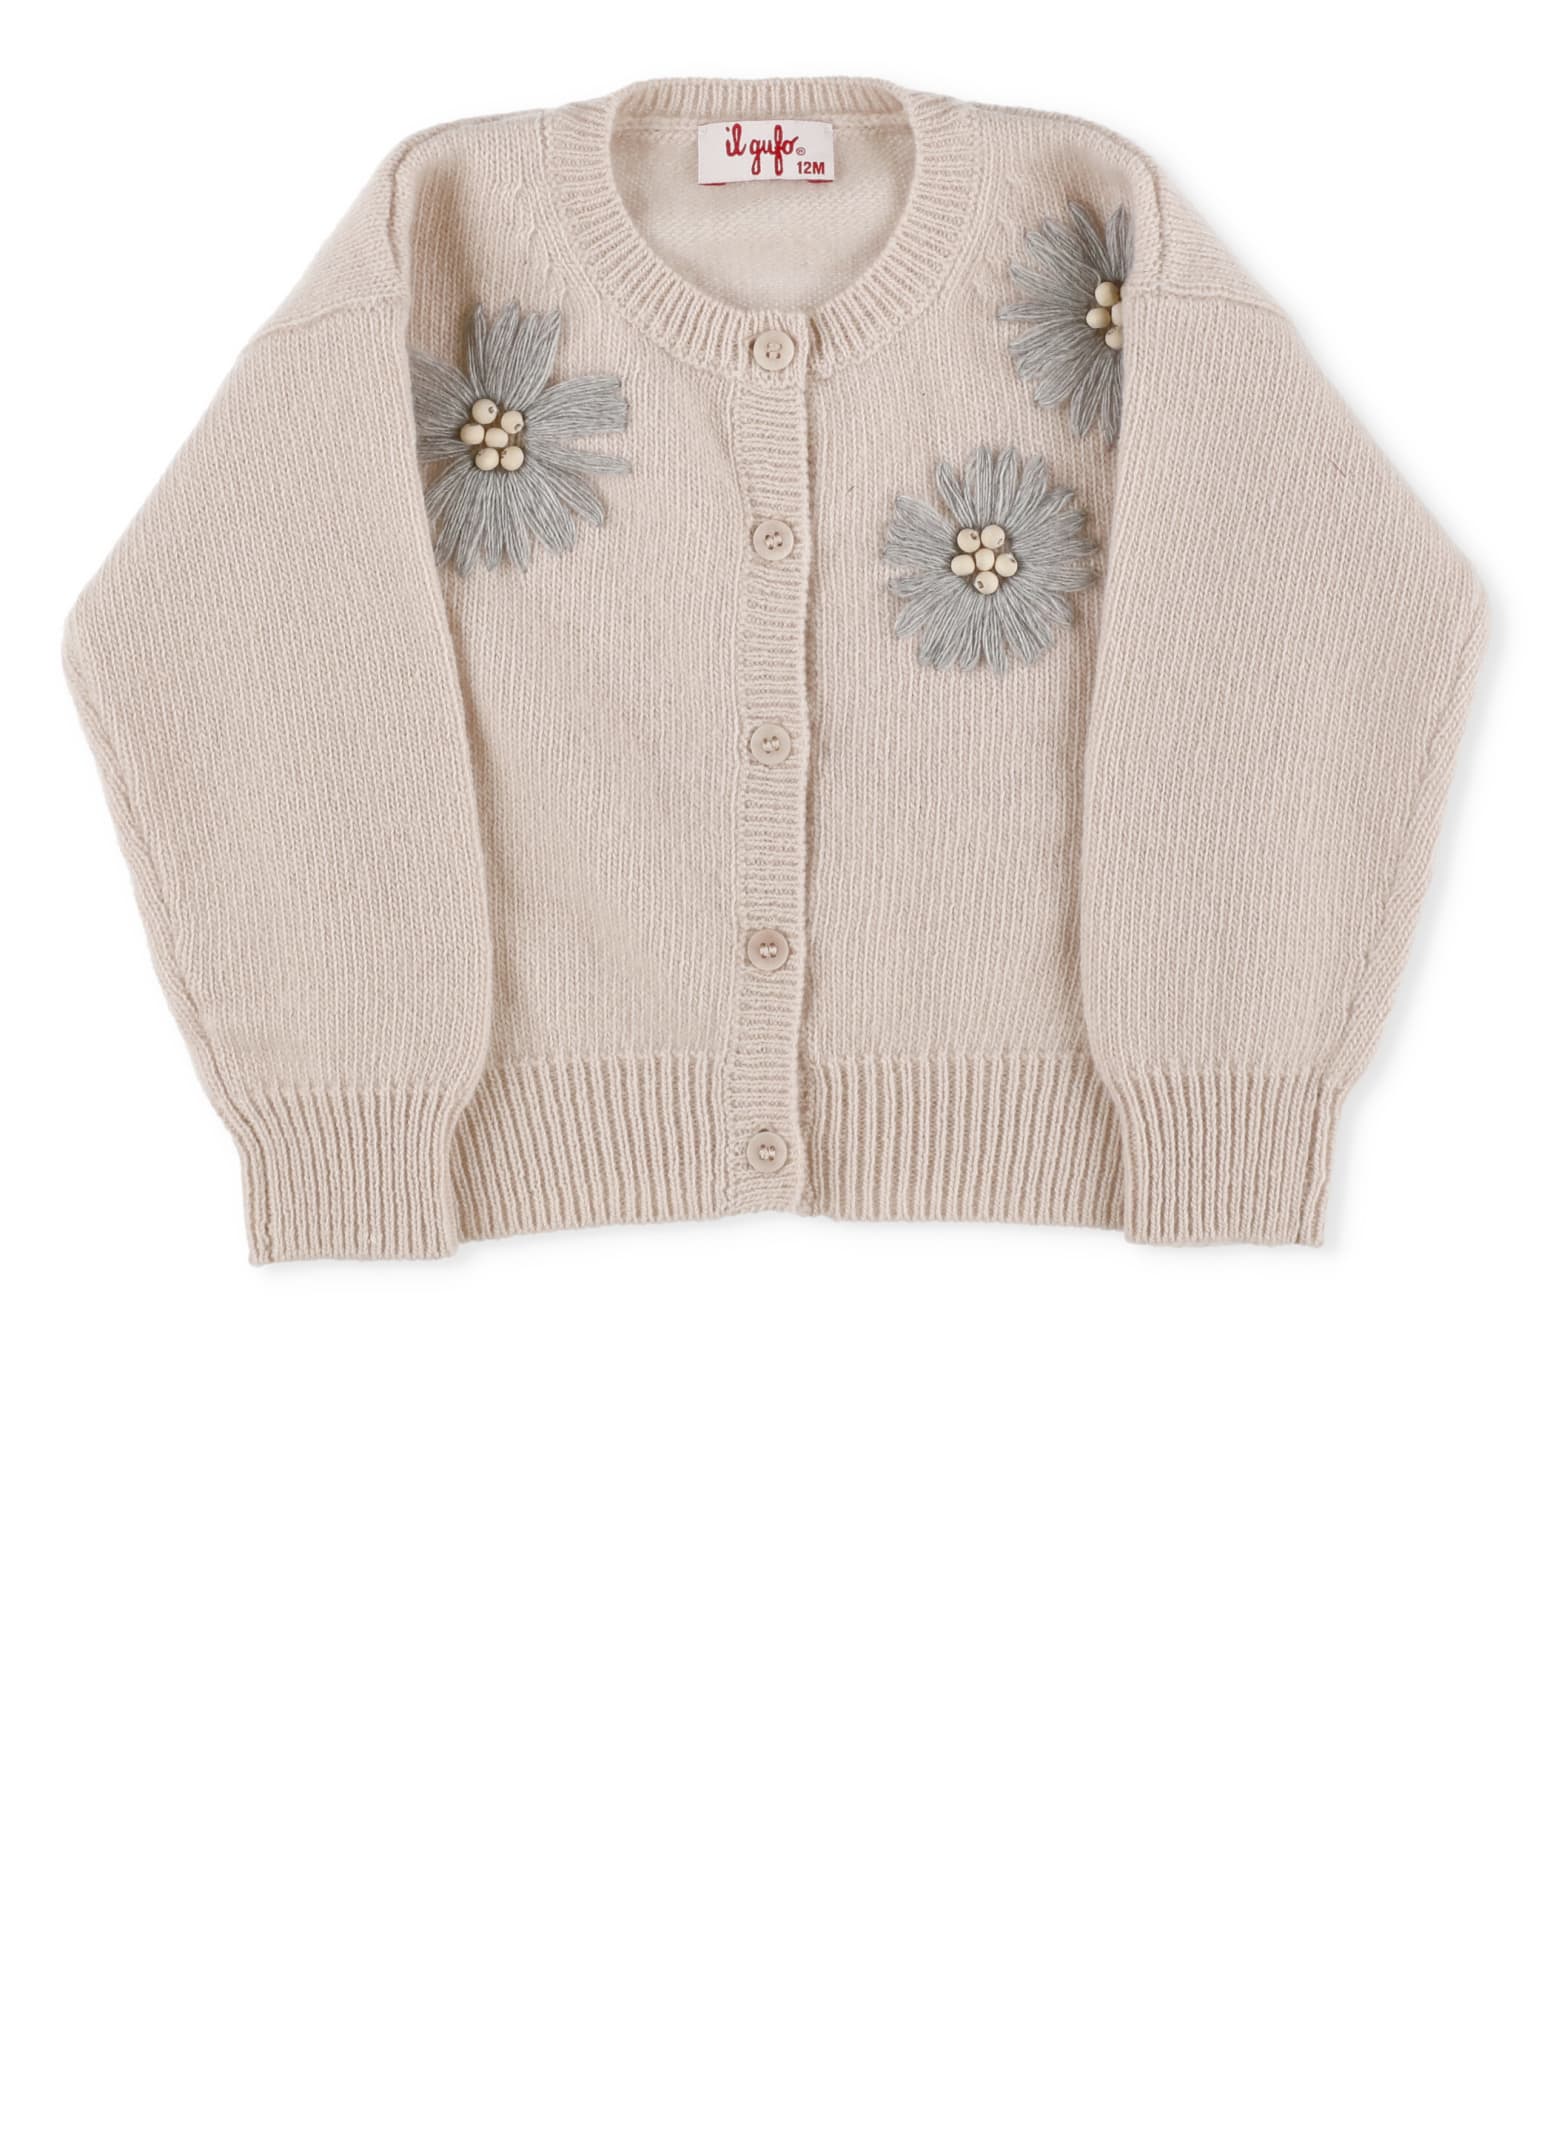 Il Gufo Embroidered Flowers Cardigan